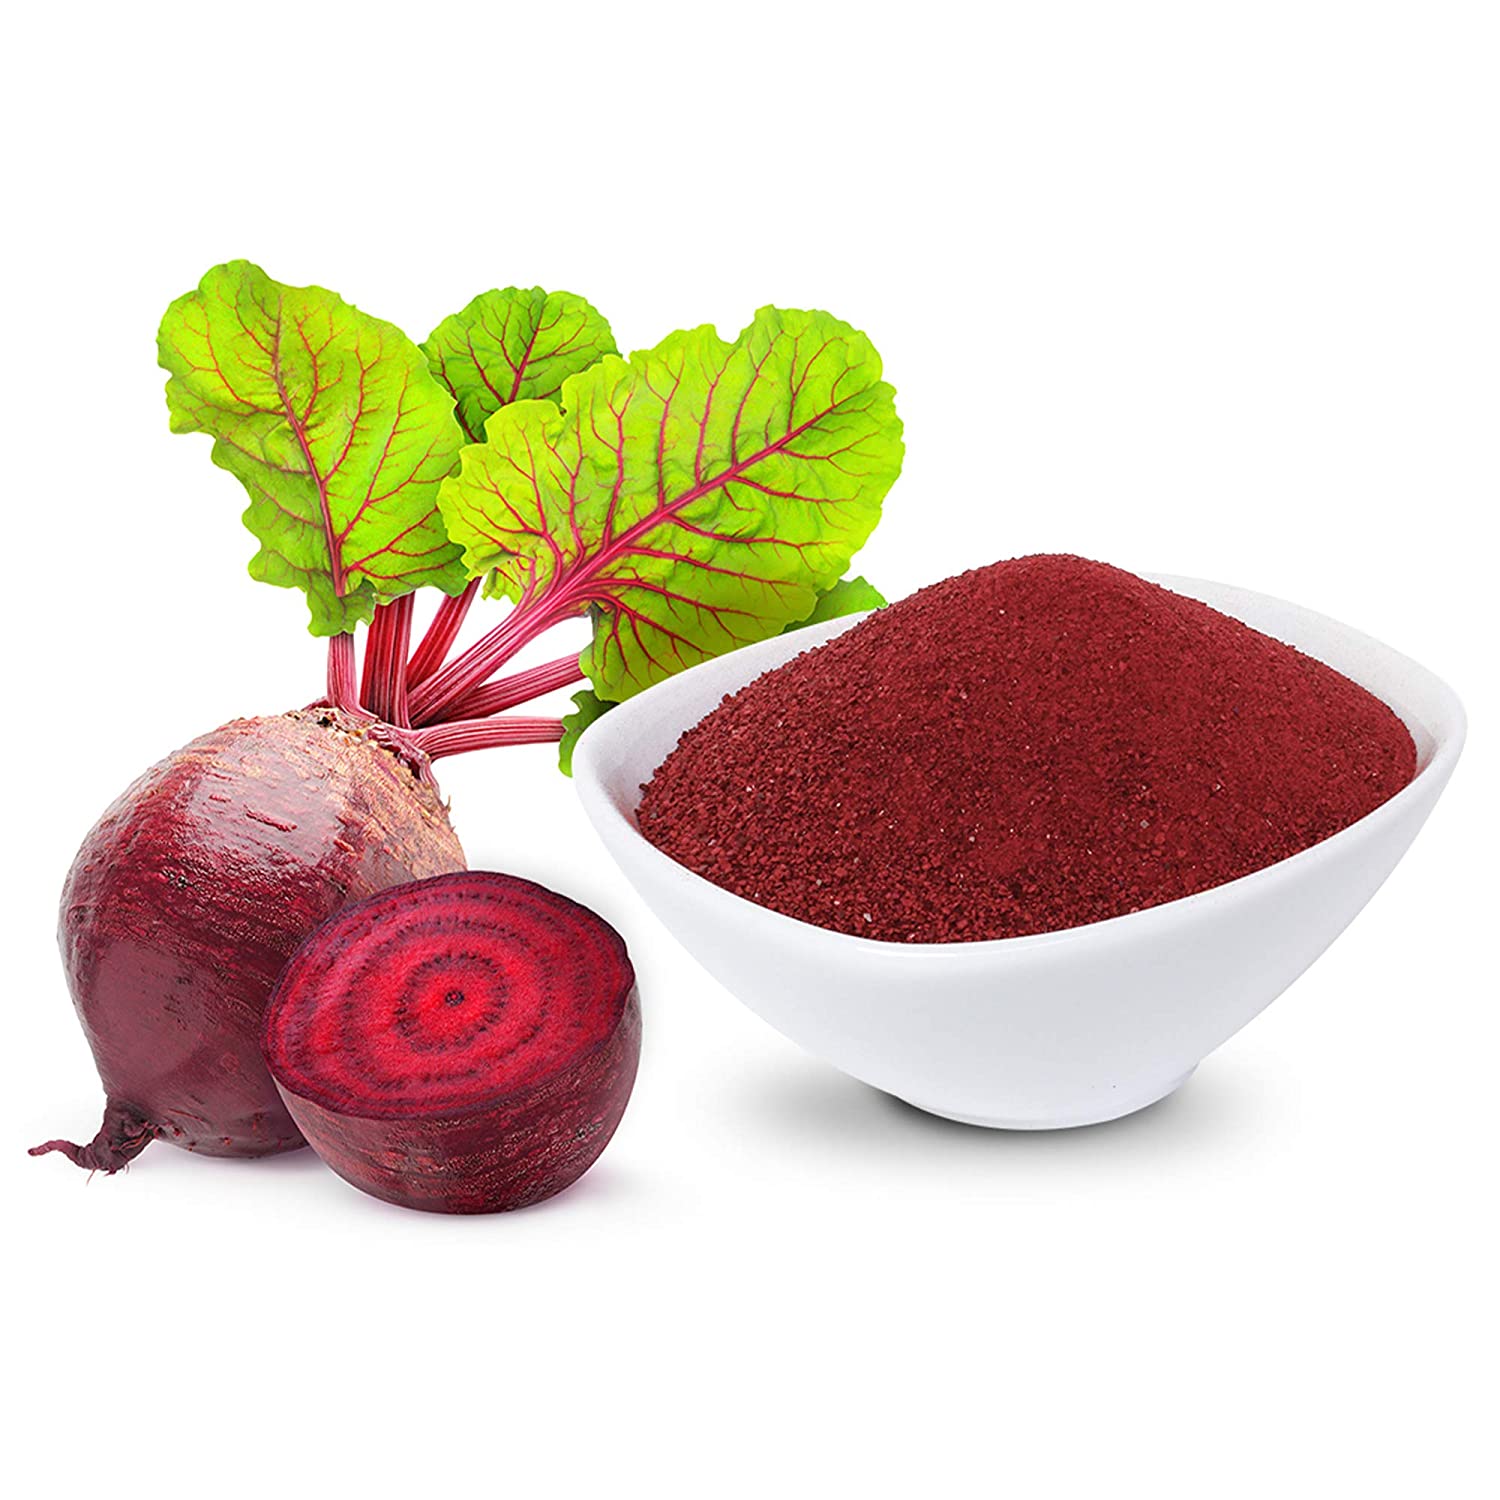 7 Beauty and Skin Care Benefits of Beetroots